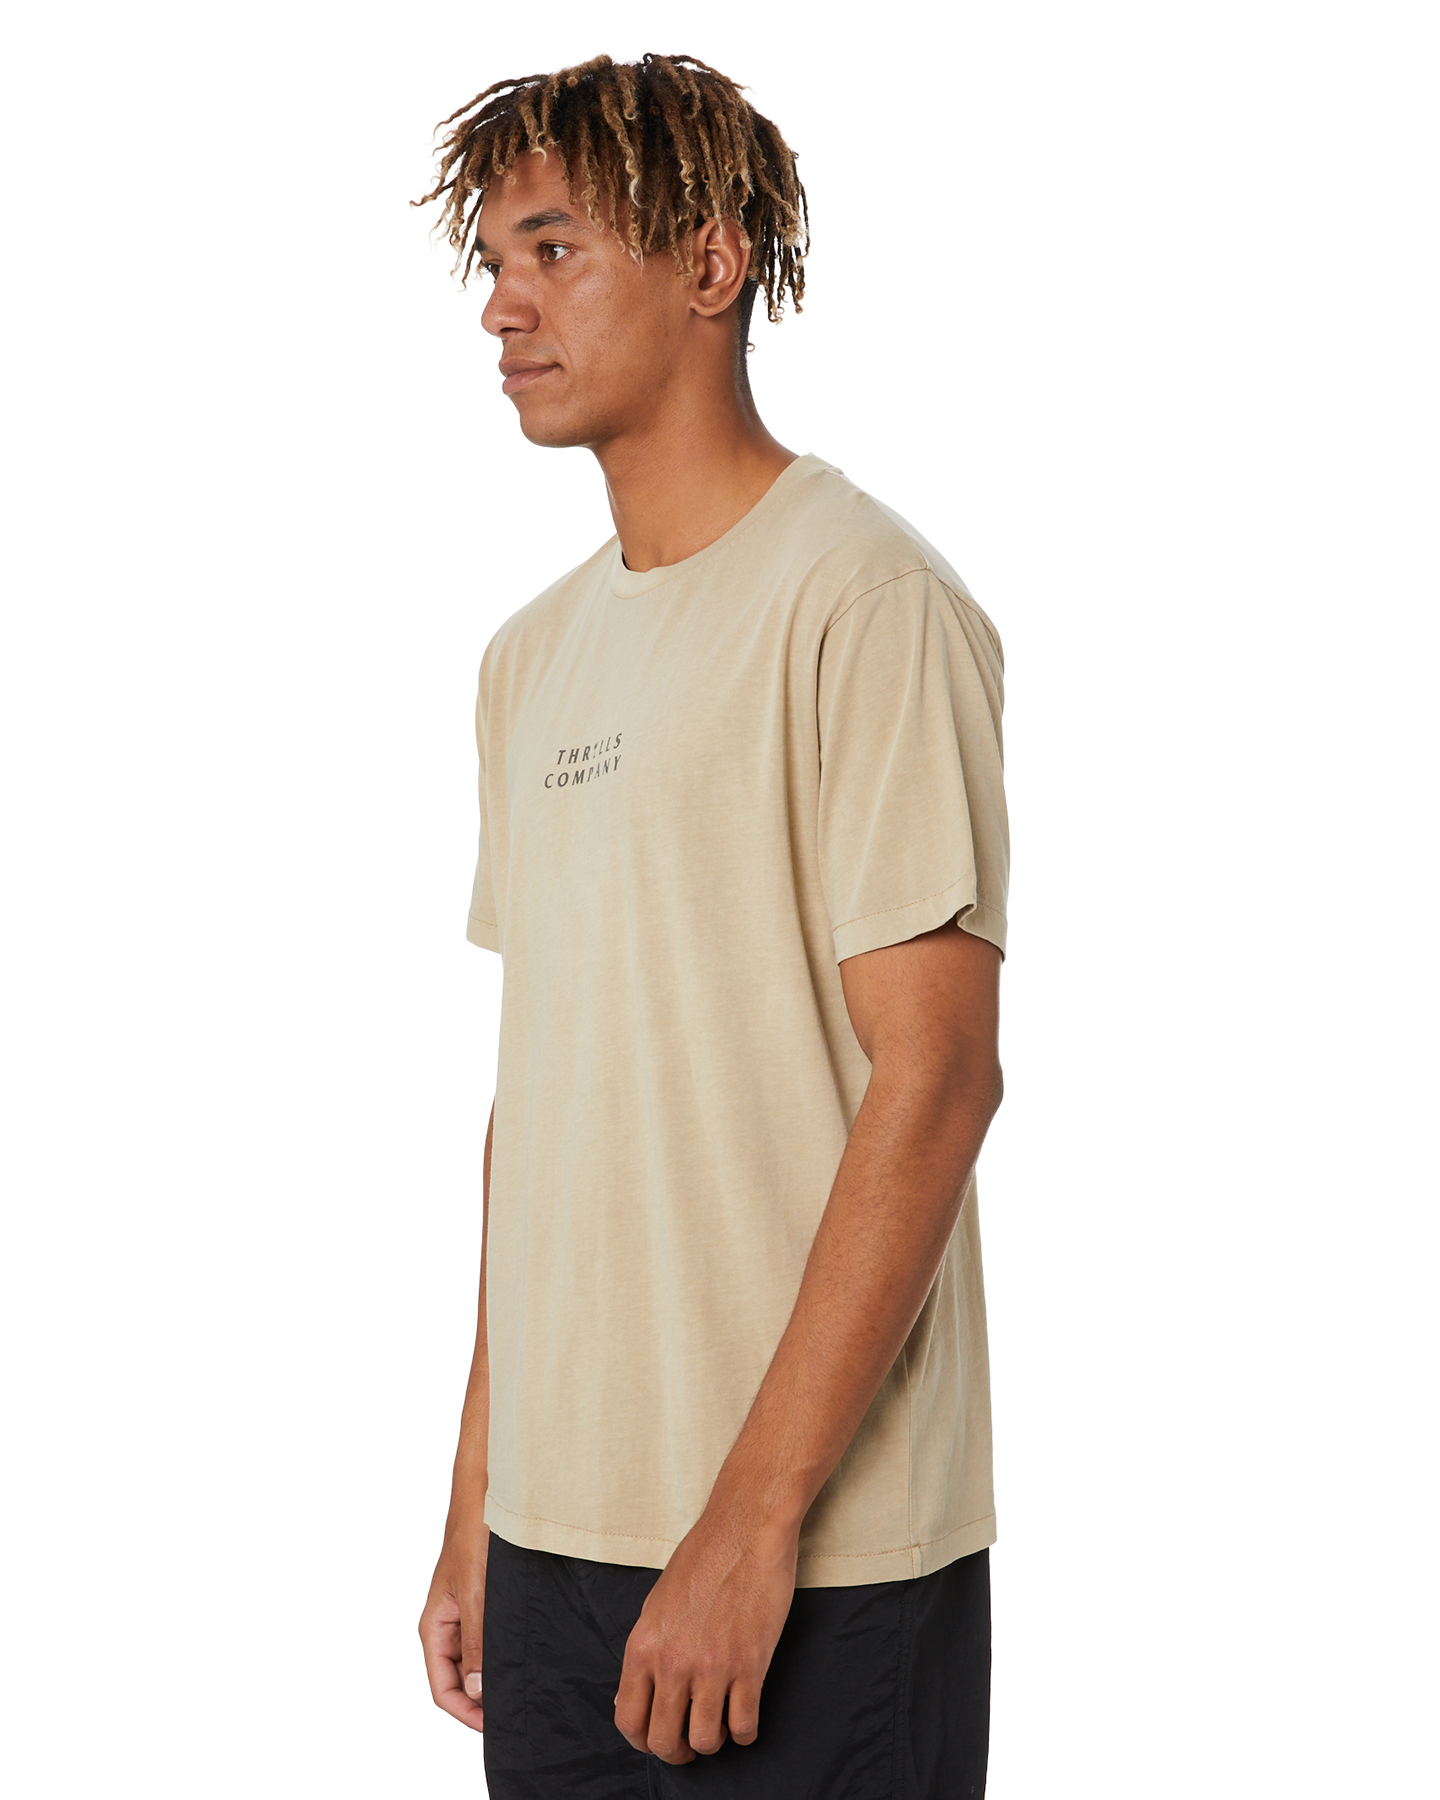 Thrills Palmed Thrills Company Mens Merch Fit Tee - Washed Tan | SurfStitch